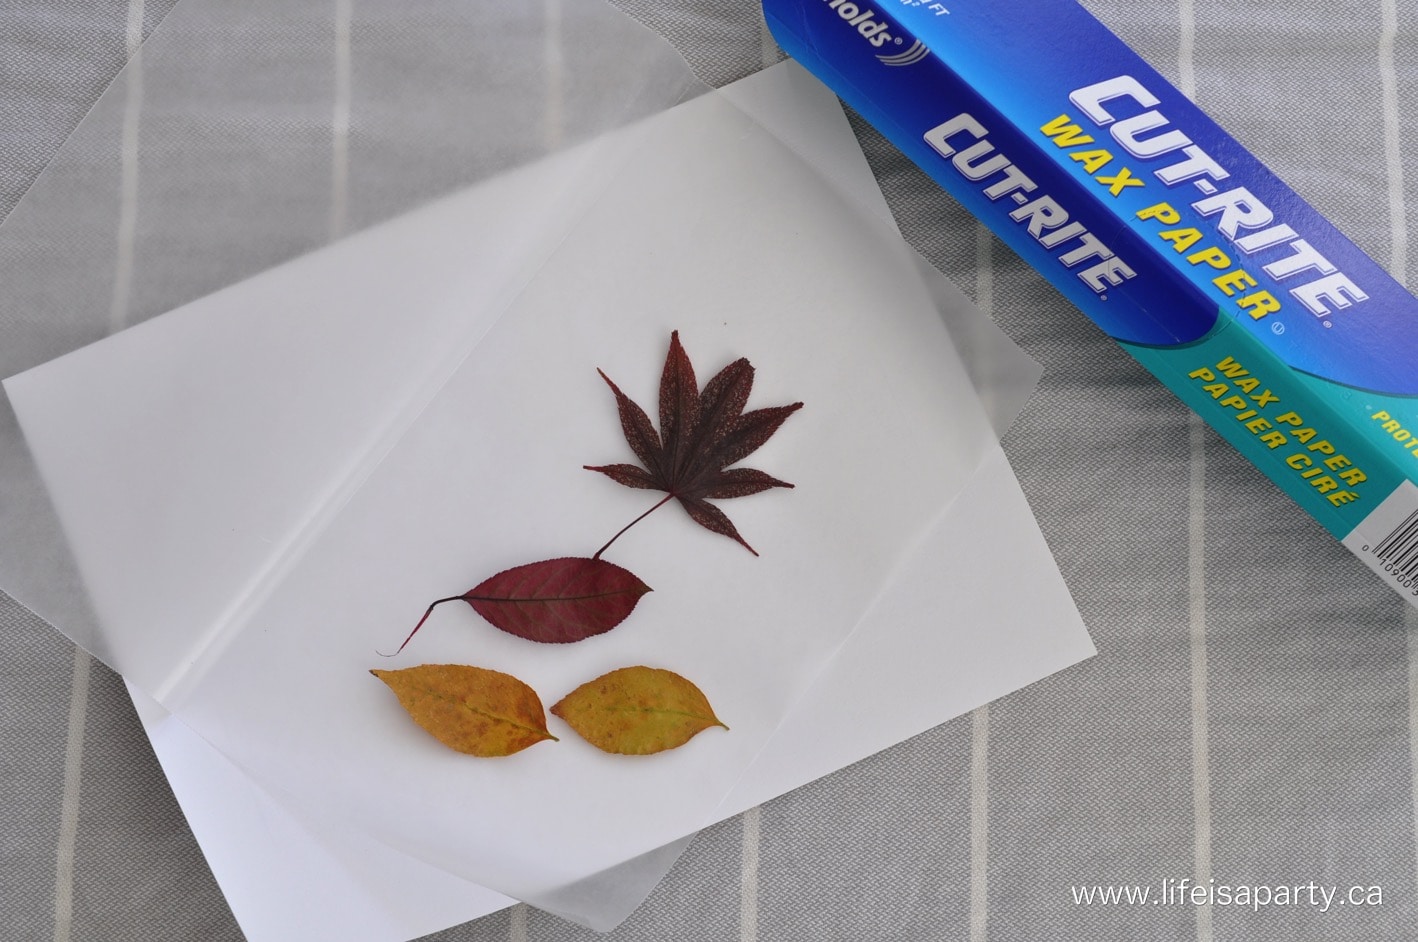 ironing fall leaves with wax paper to preserve them